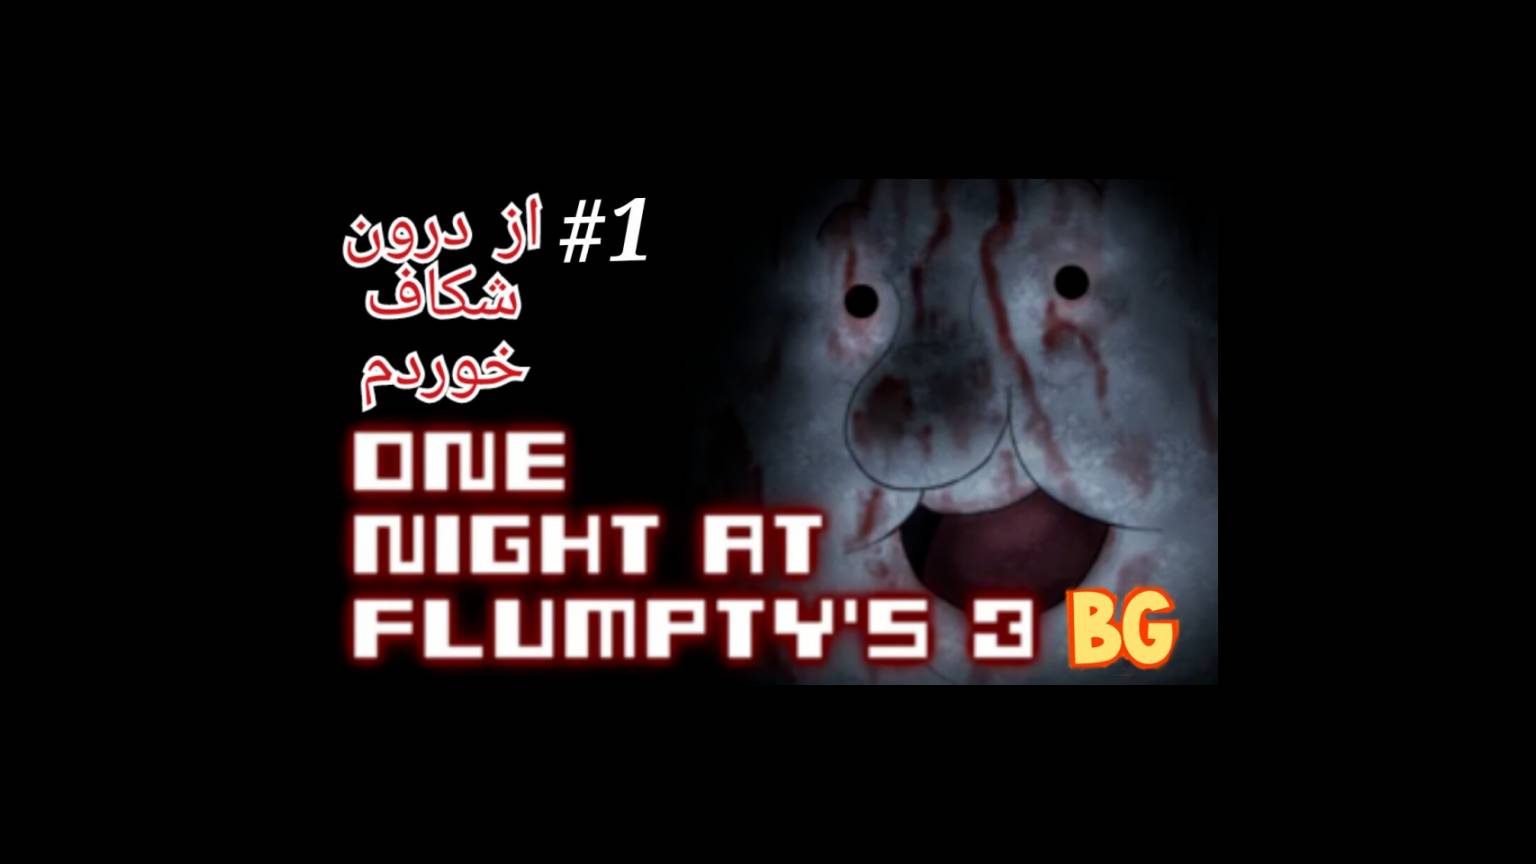 HARD BOILED MODE (and LOTS of scares)  One Night at Flumpty's 2 ENDING 